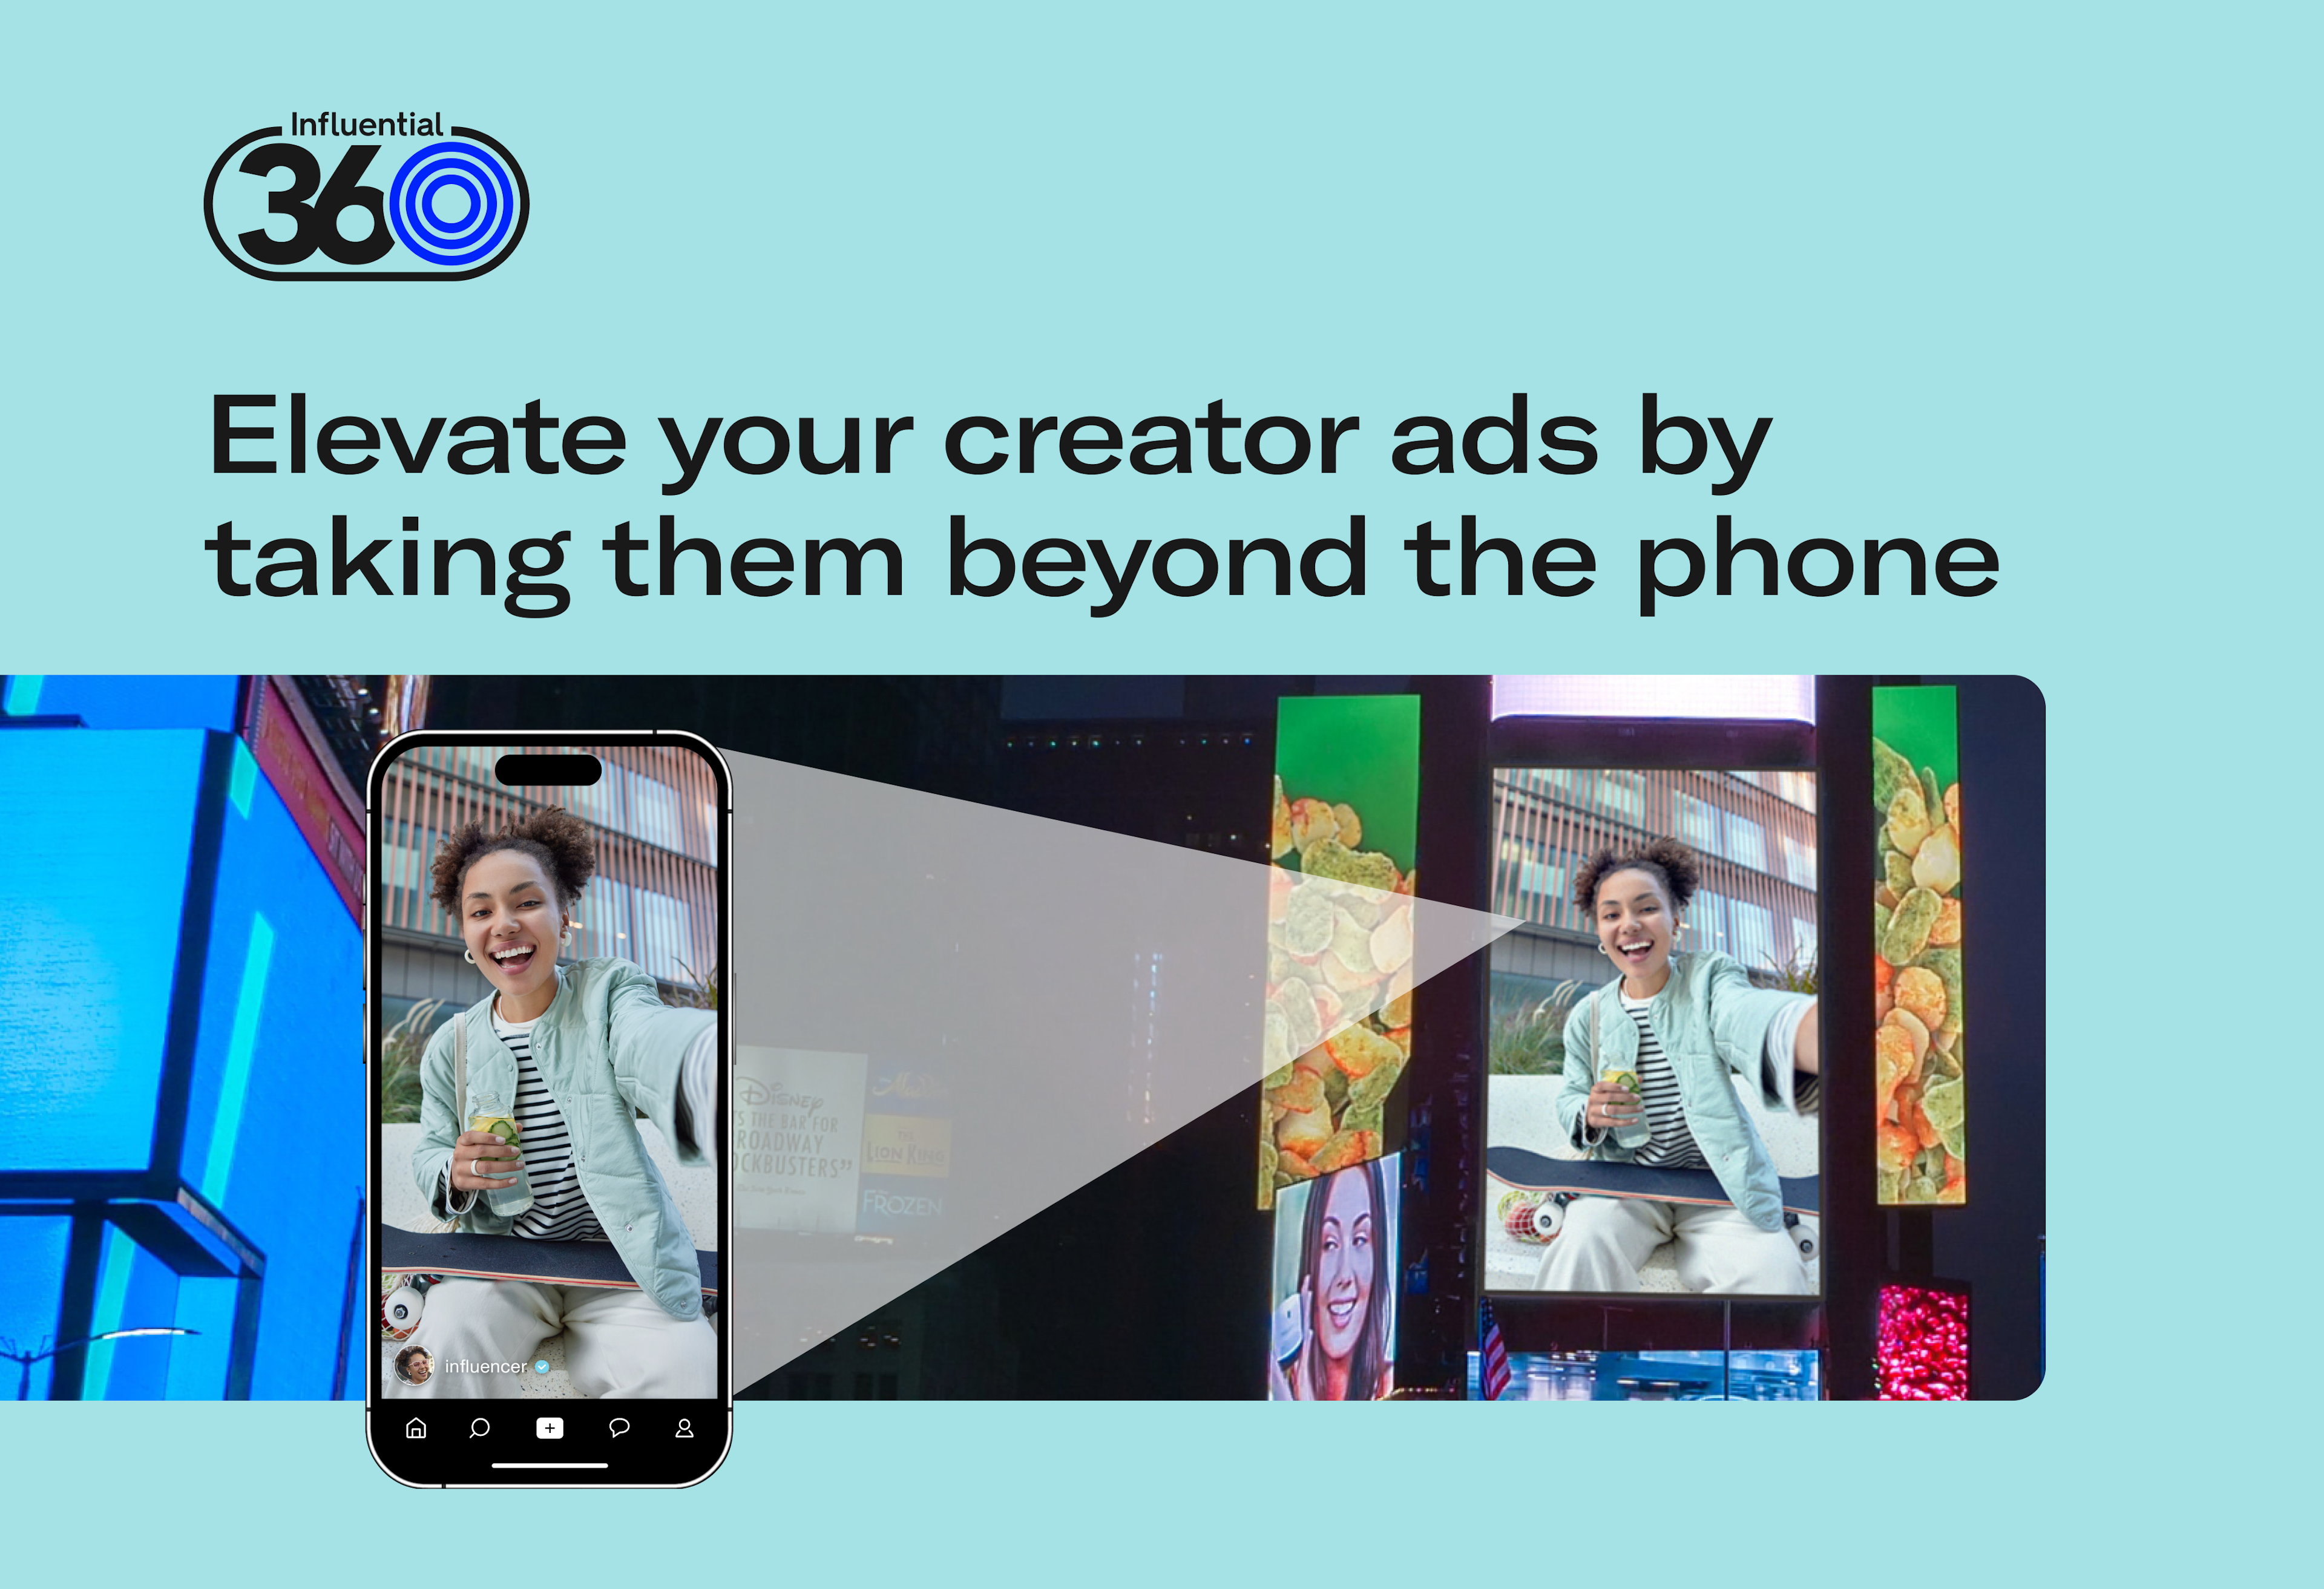 Influential360 Teams Up With Adomni to Elevate Your Creator Ads